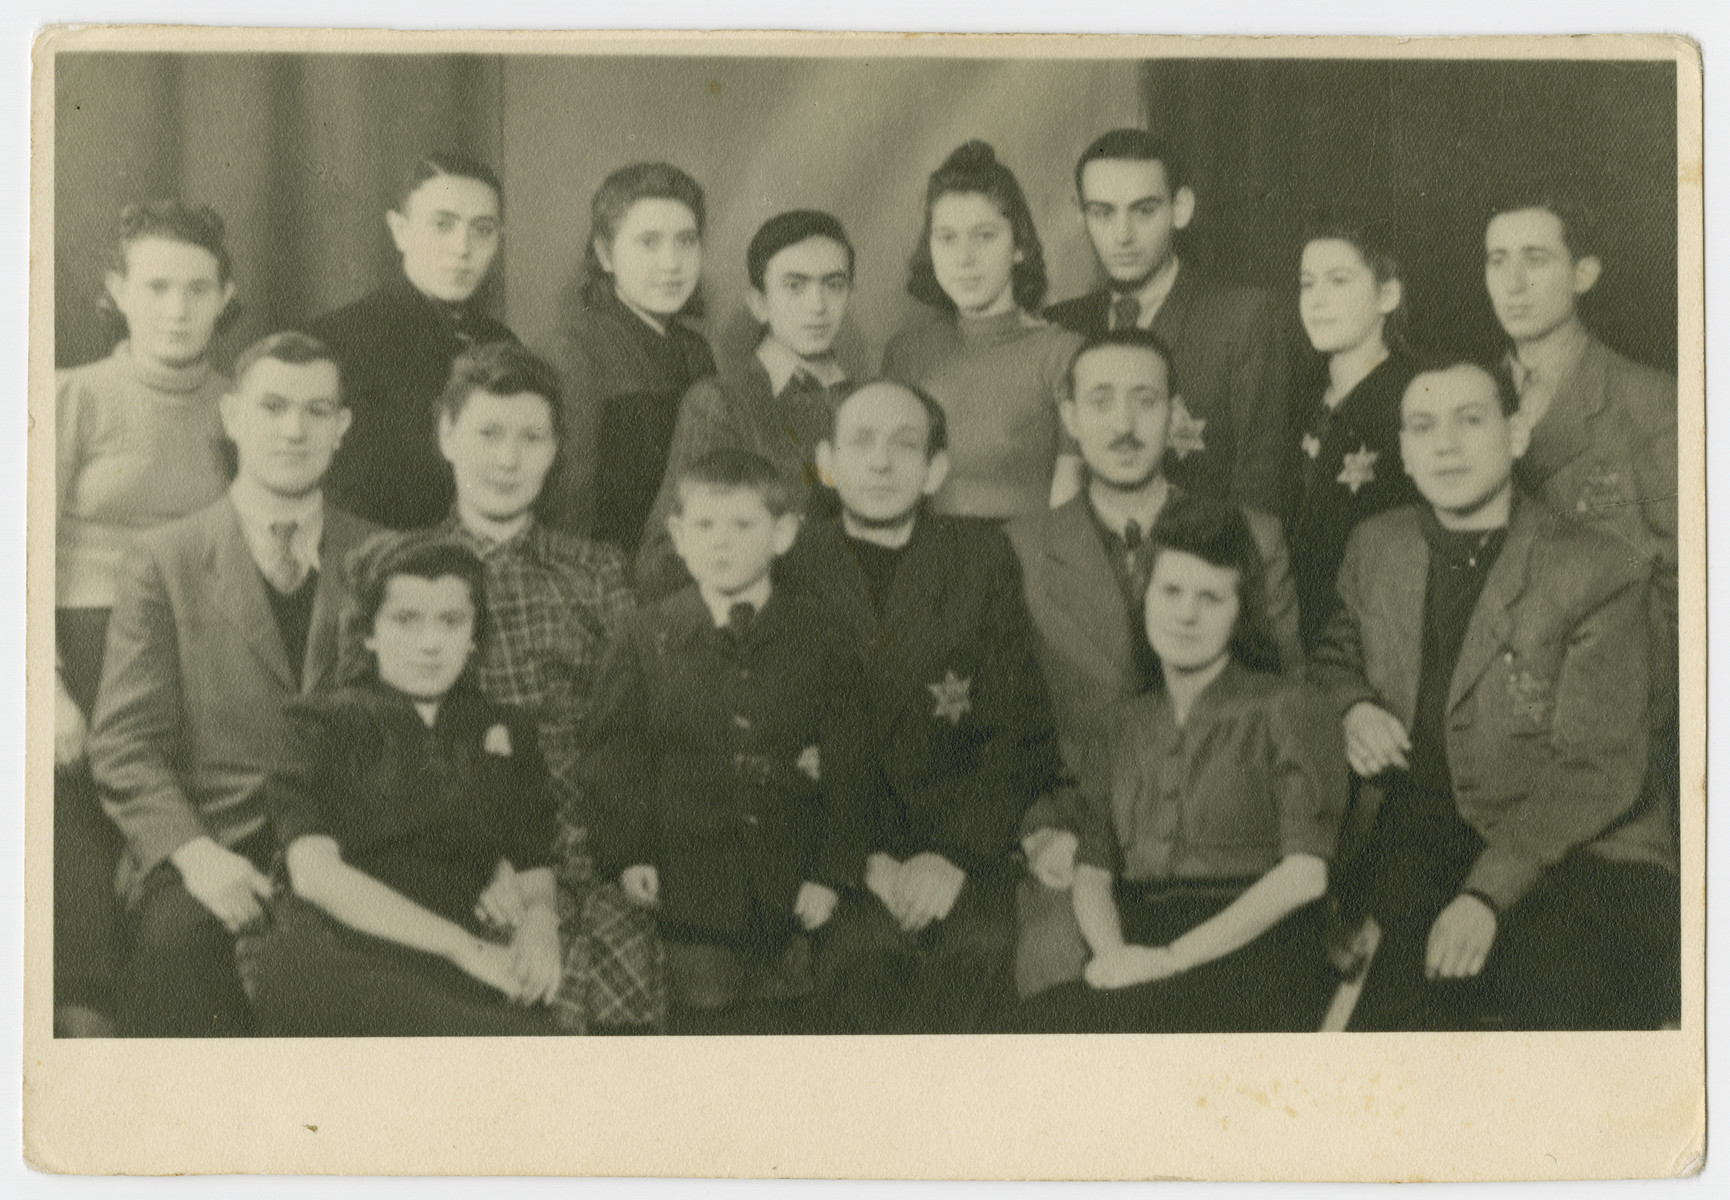 Group portrait of Jews in the Bedzin ghetto wearing the Jewish star.
          
 Among those pictured are Ruchale Hassenberg, Chaske Hassenberg and Motek Wandesan.